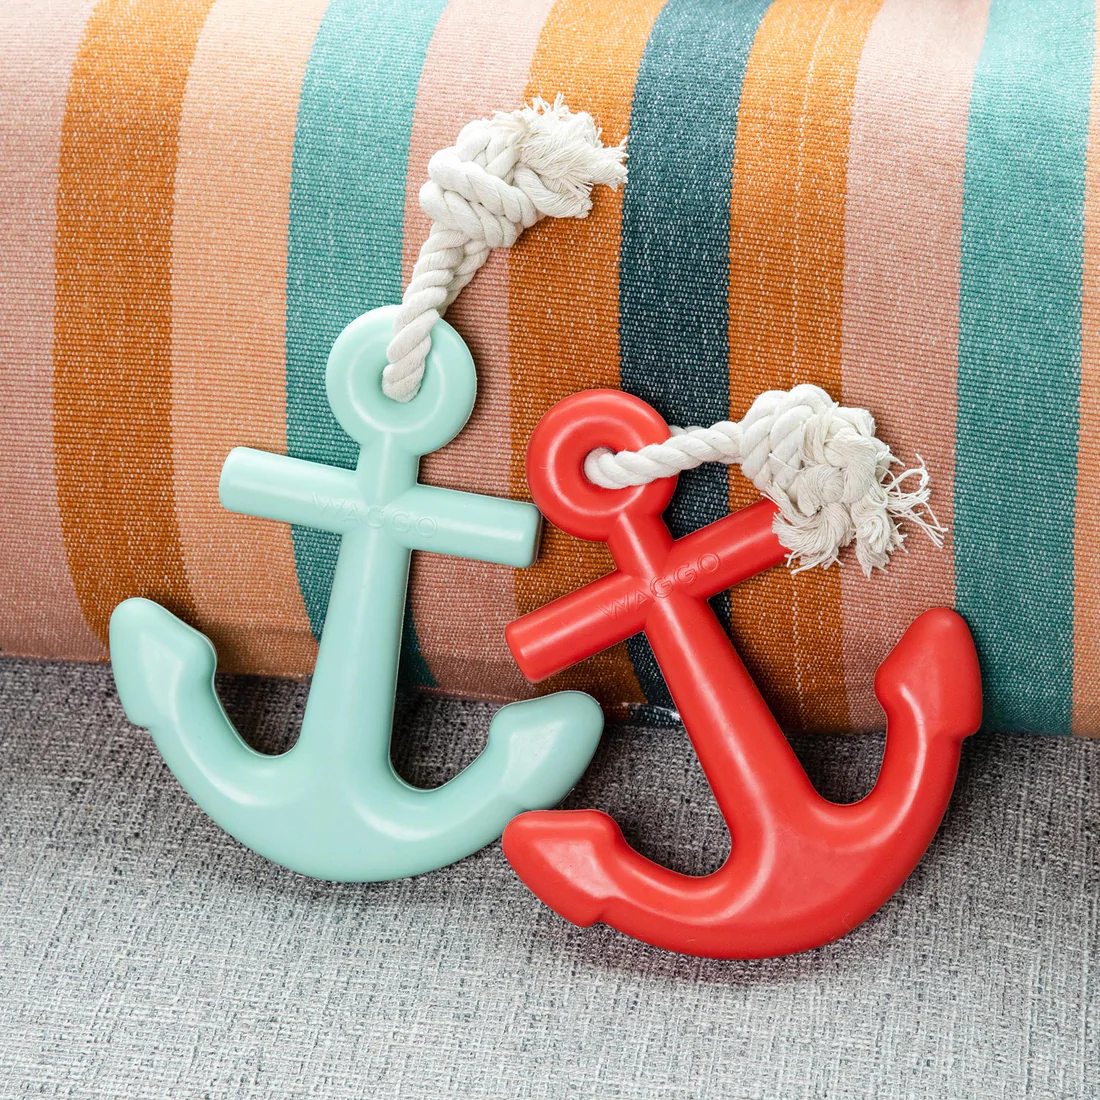 Navy Anchors Aweigh Rubber Dog Toy